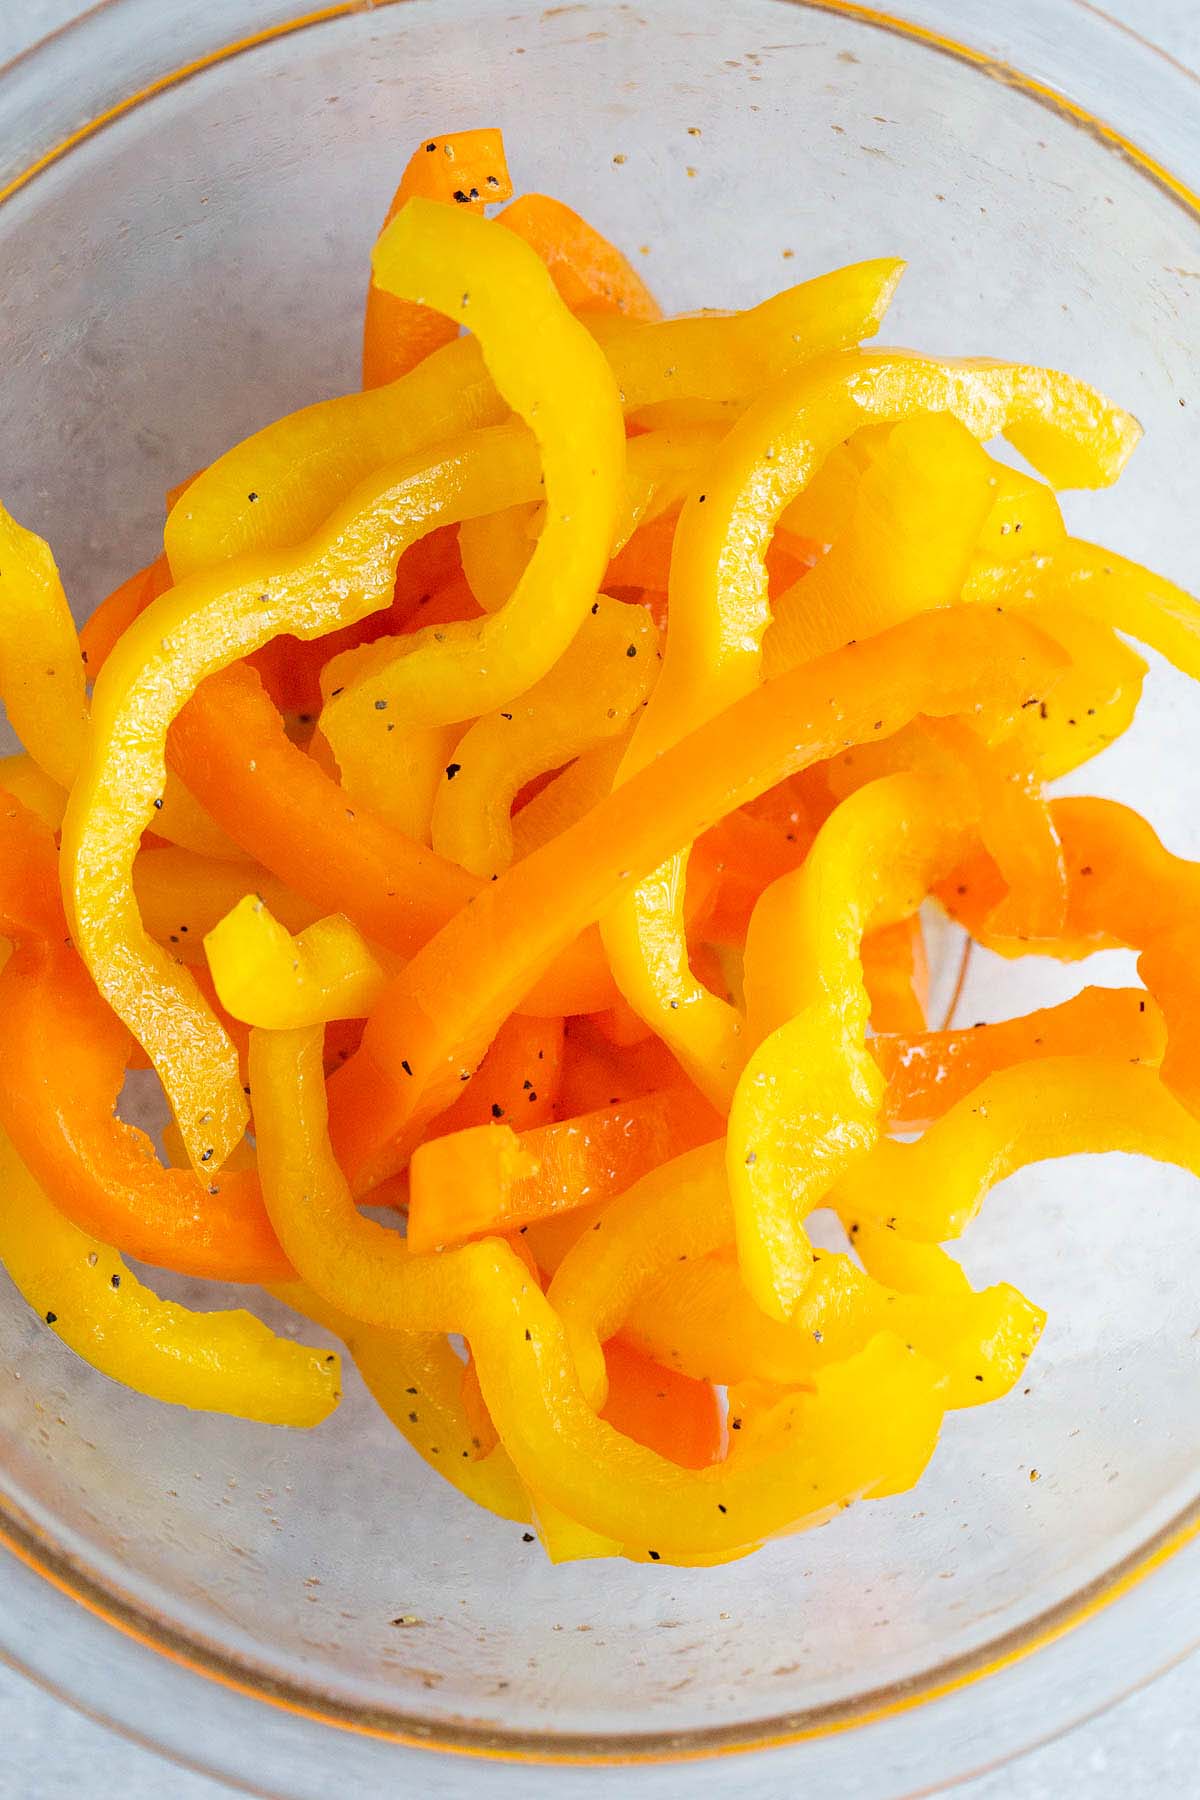 Sliced bell peppers tossed with oil and seasonings